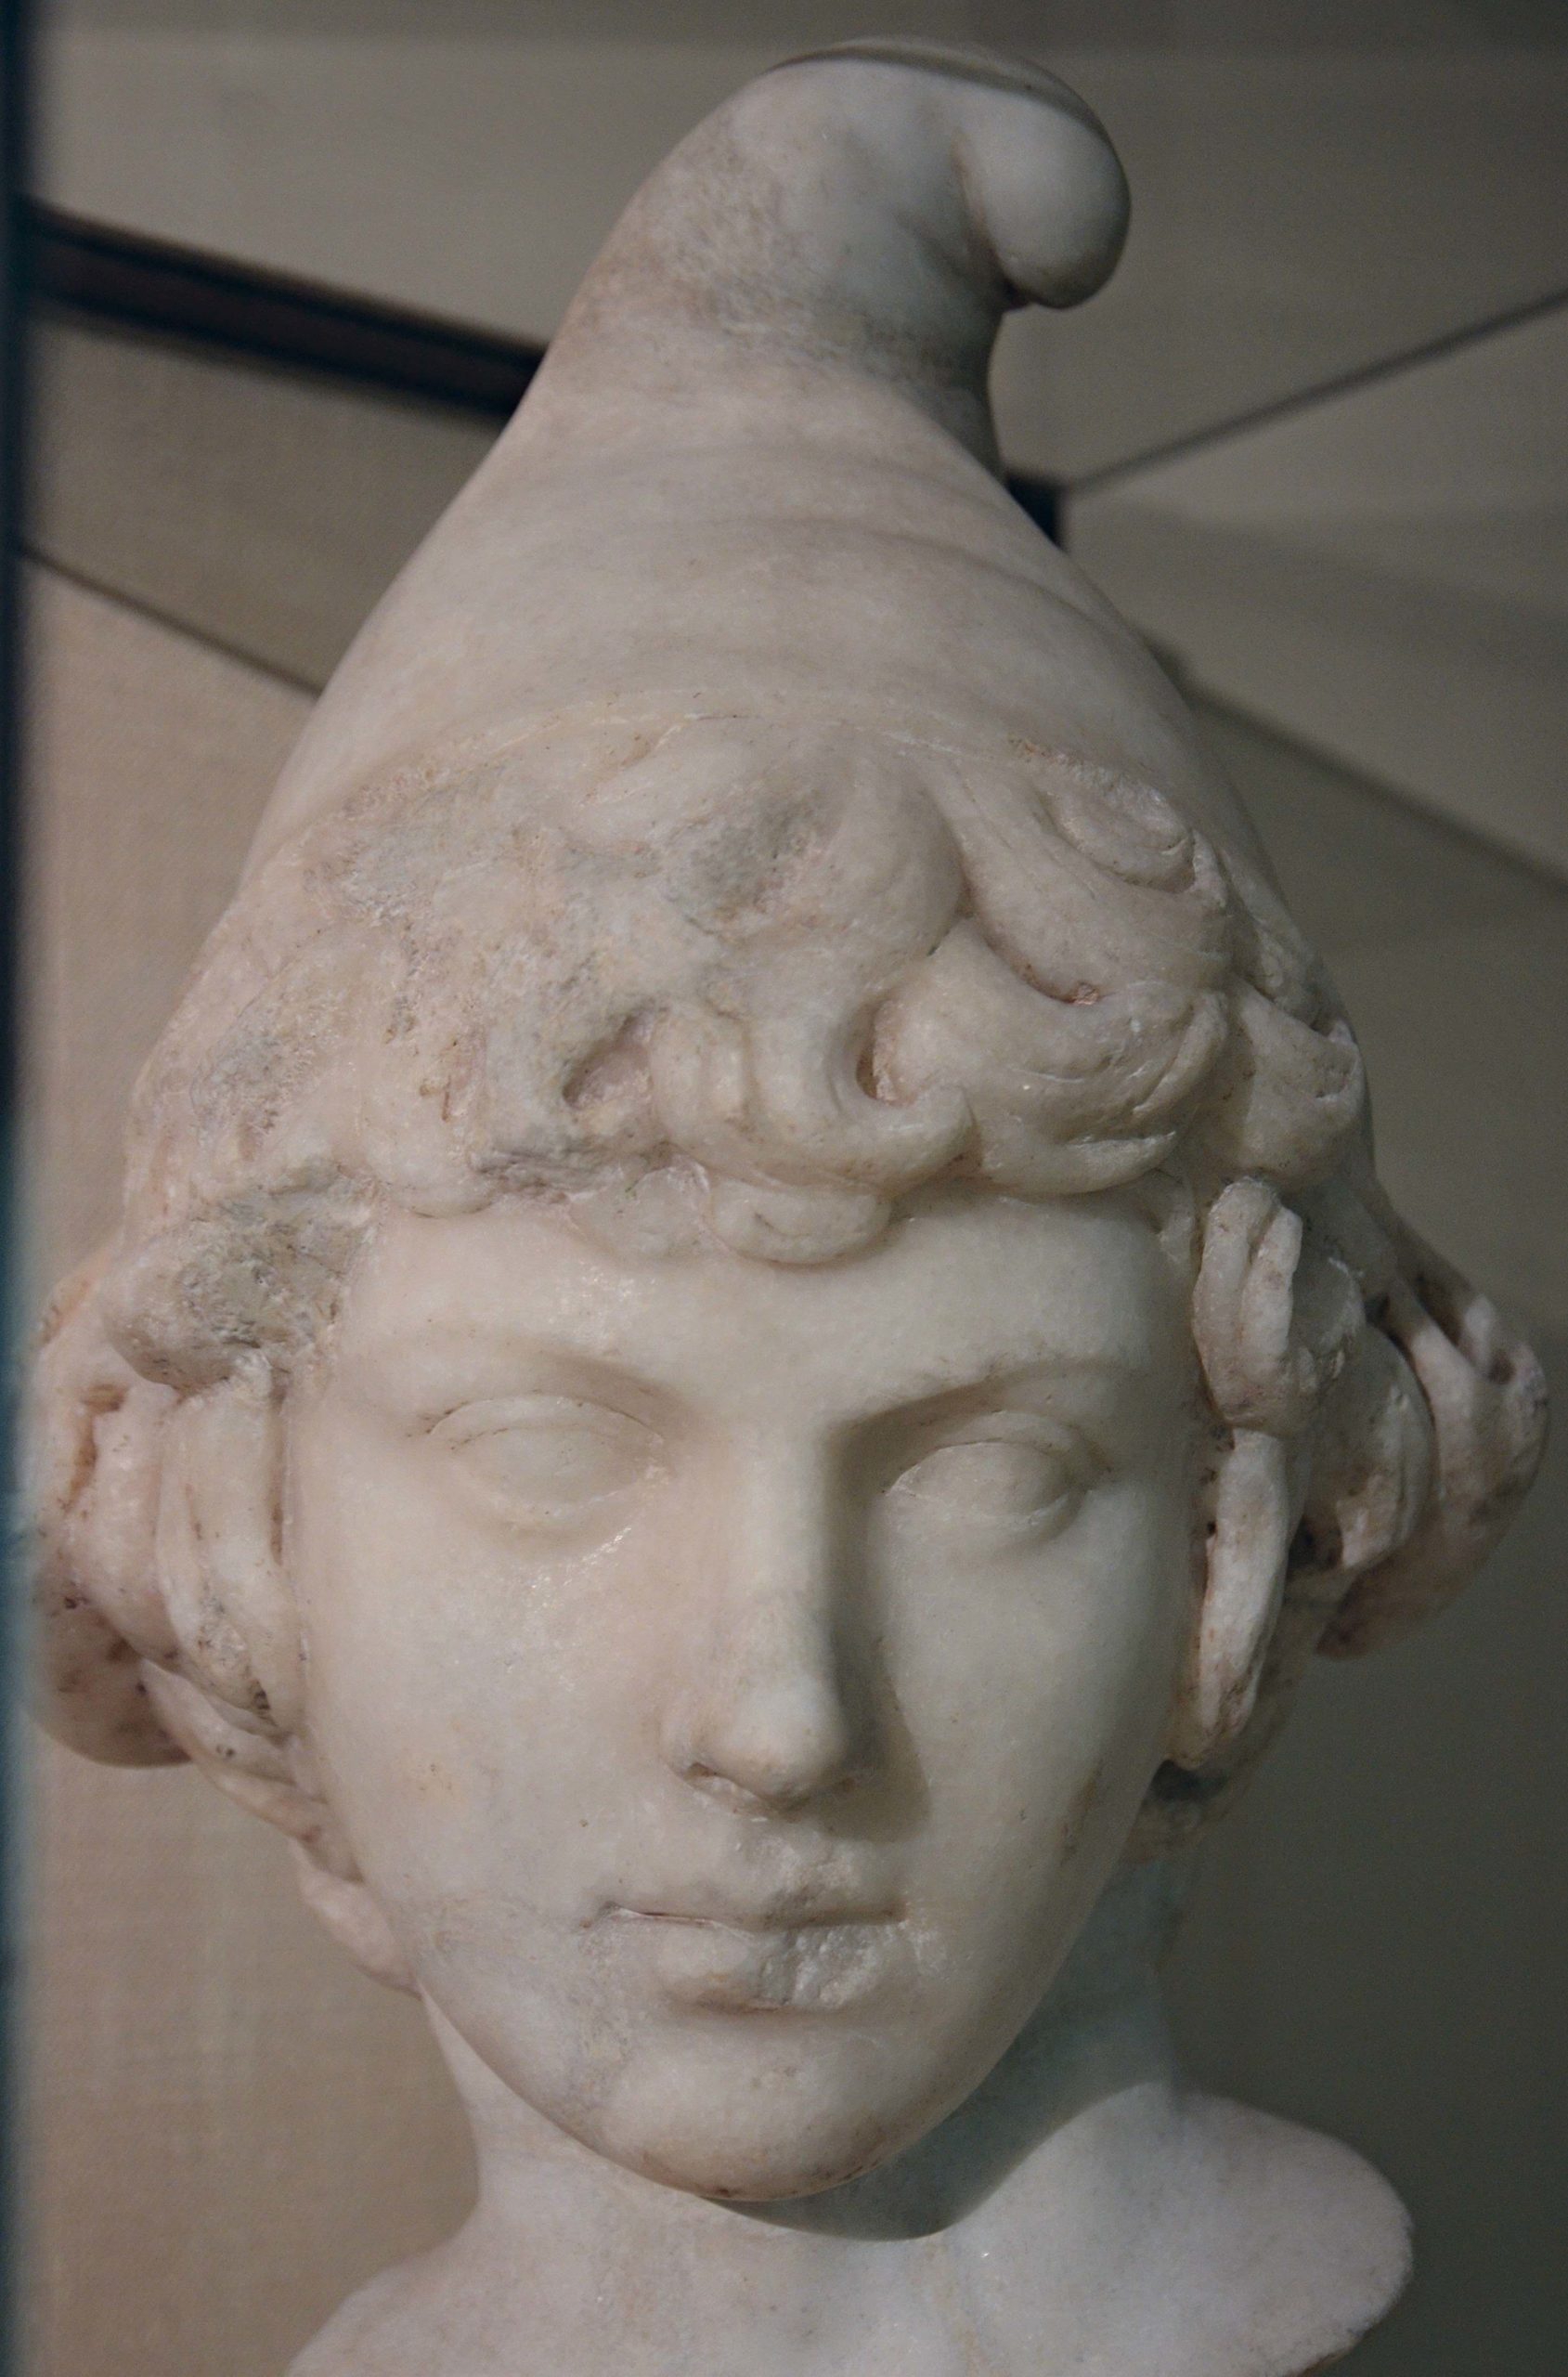 Bust of Attis as a child wearing the Phrygian cap, Parian marble, 2nd century AD, probably during the reign of Hadrian: the portrait bears ressemblance to those of Antinous